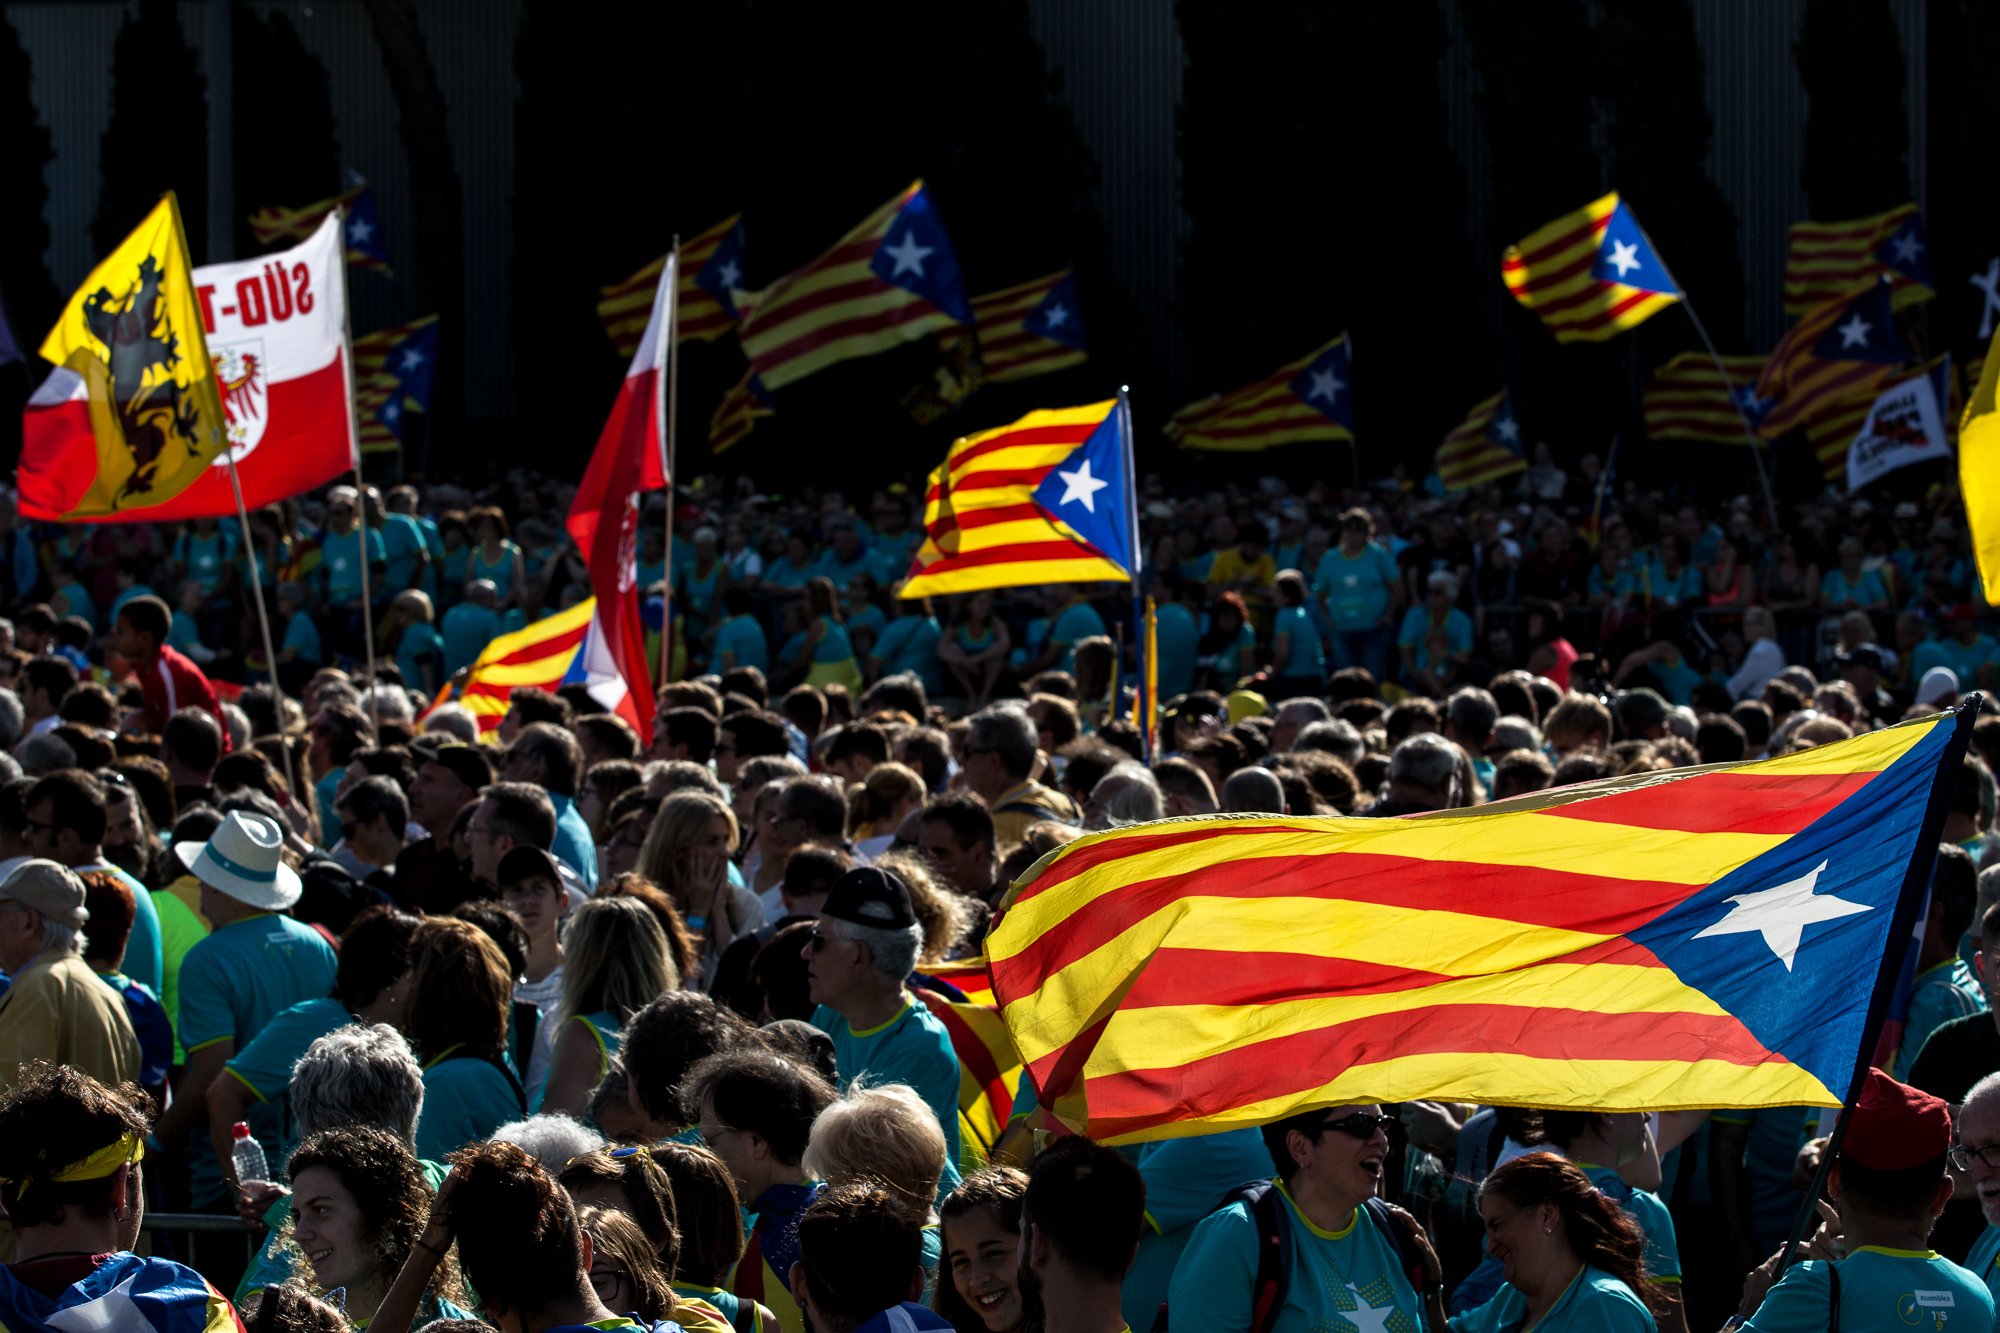 Austrian newspaper: "Why a heated autumn looms for Catalonia"